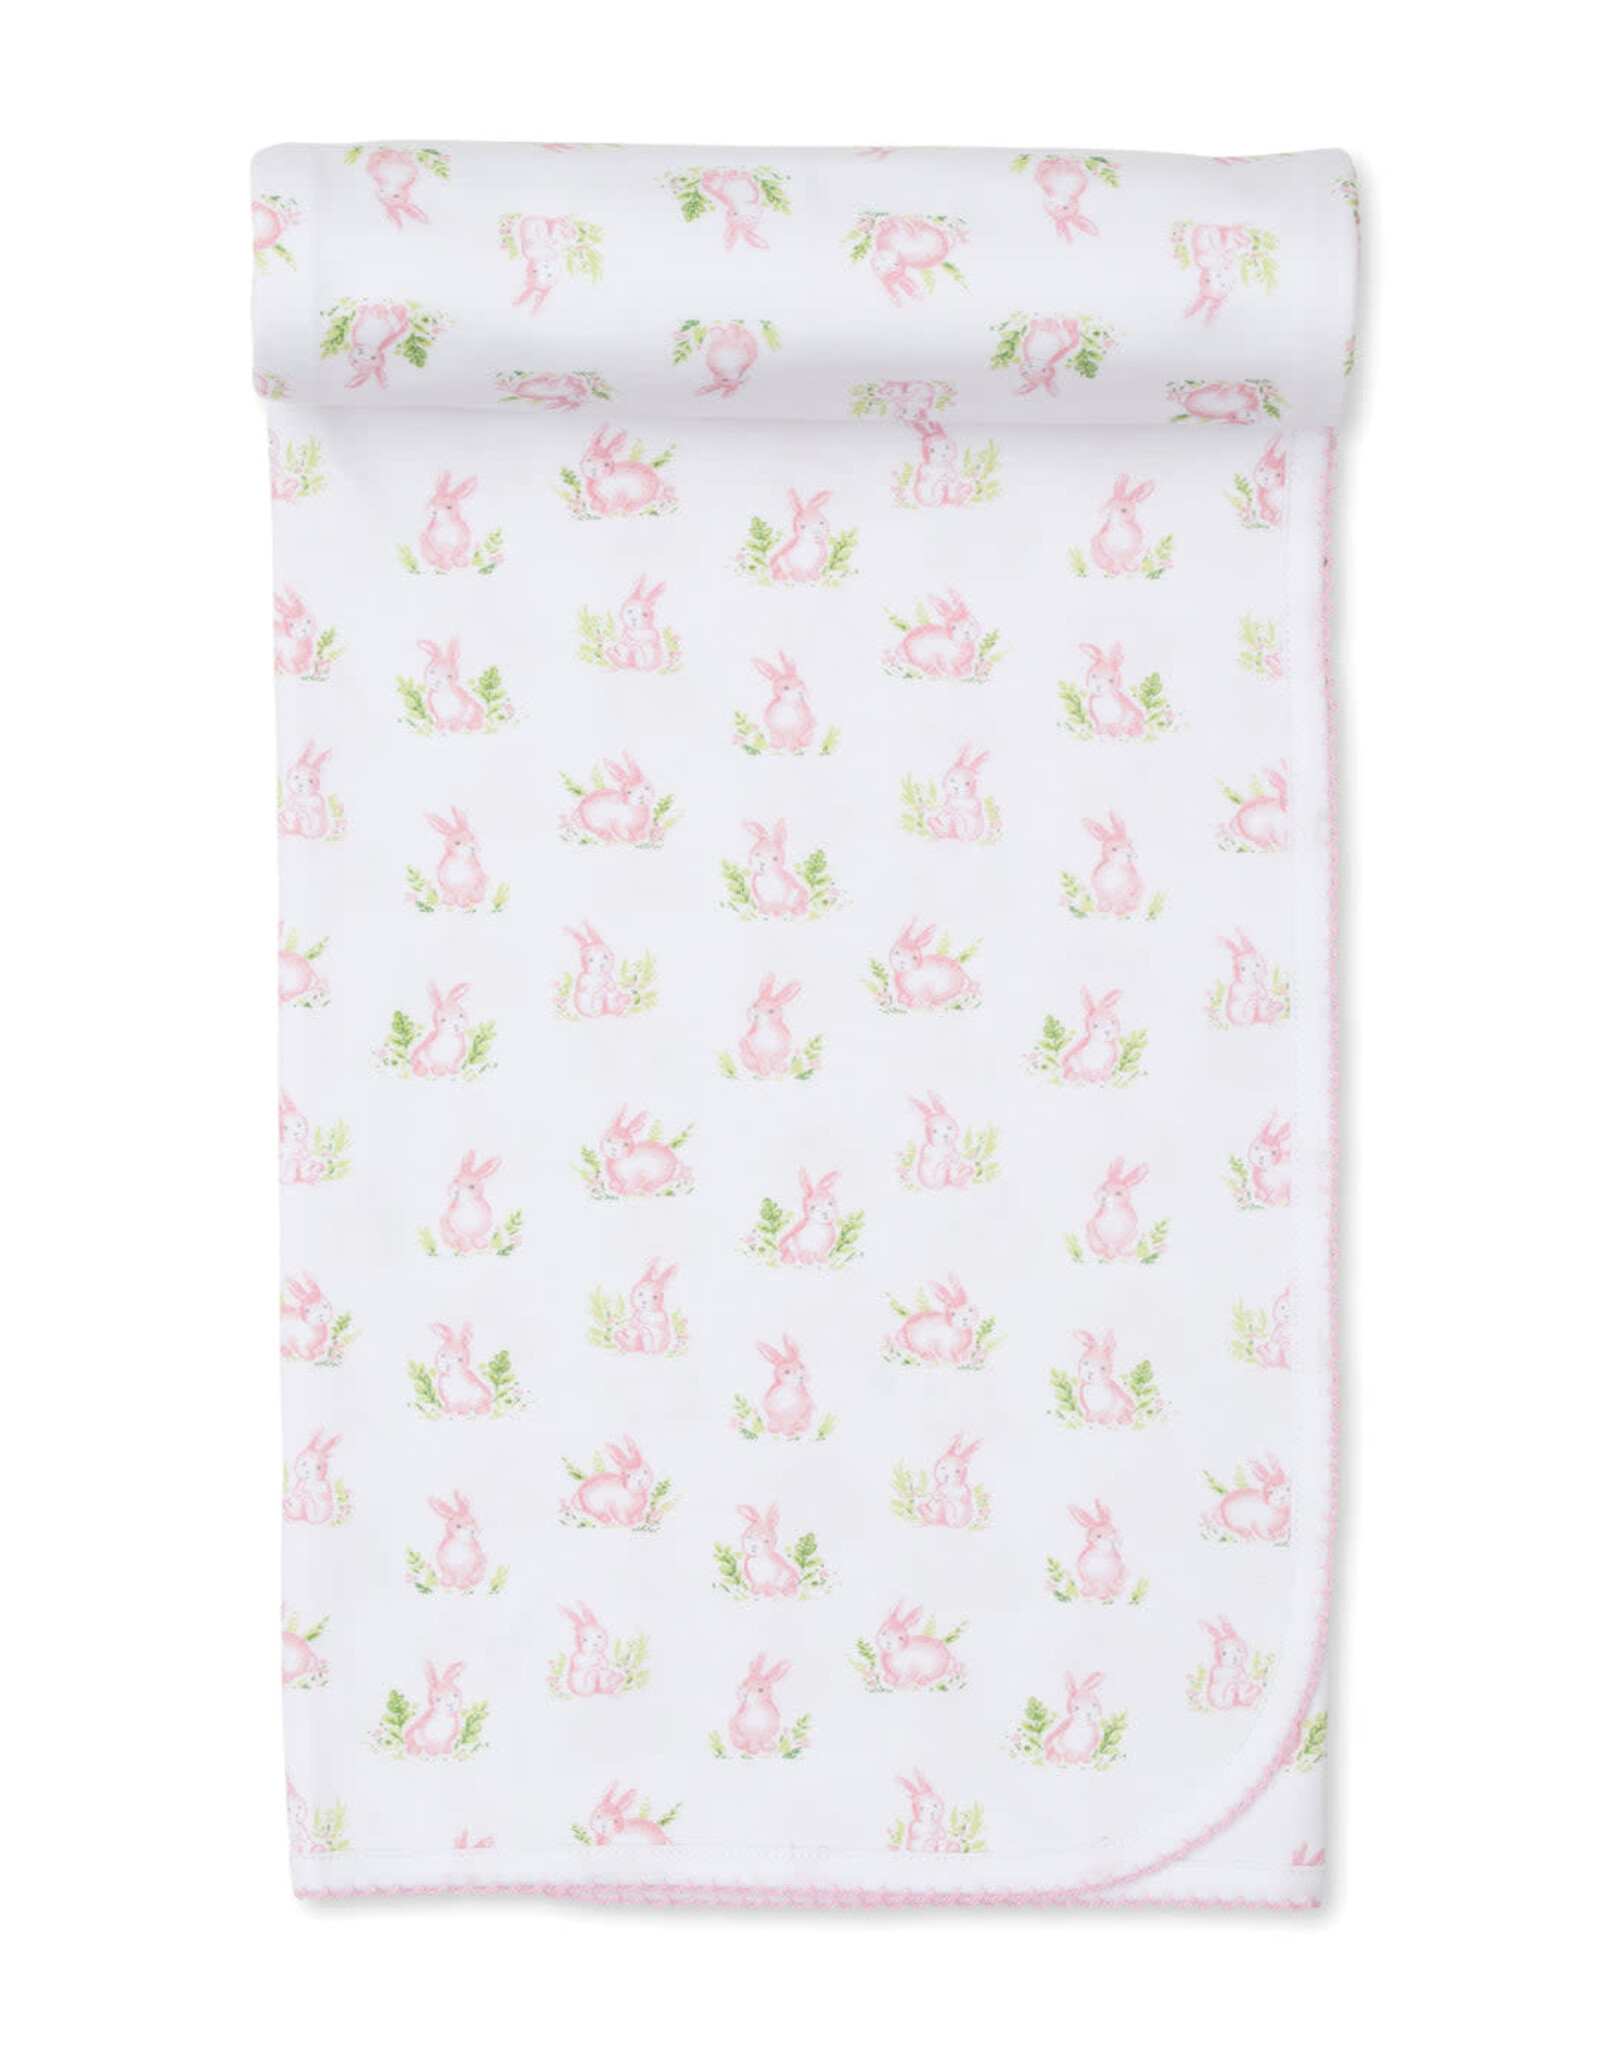 Kissy Kissy Pink Cottontail Hollow Swaddle Blanket